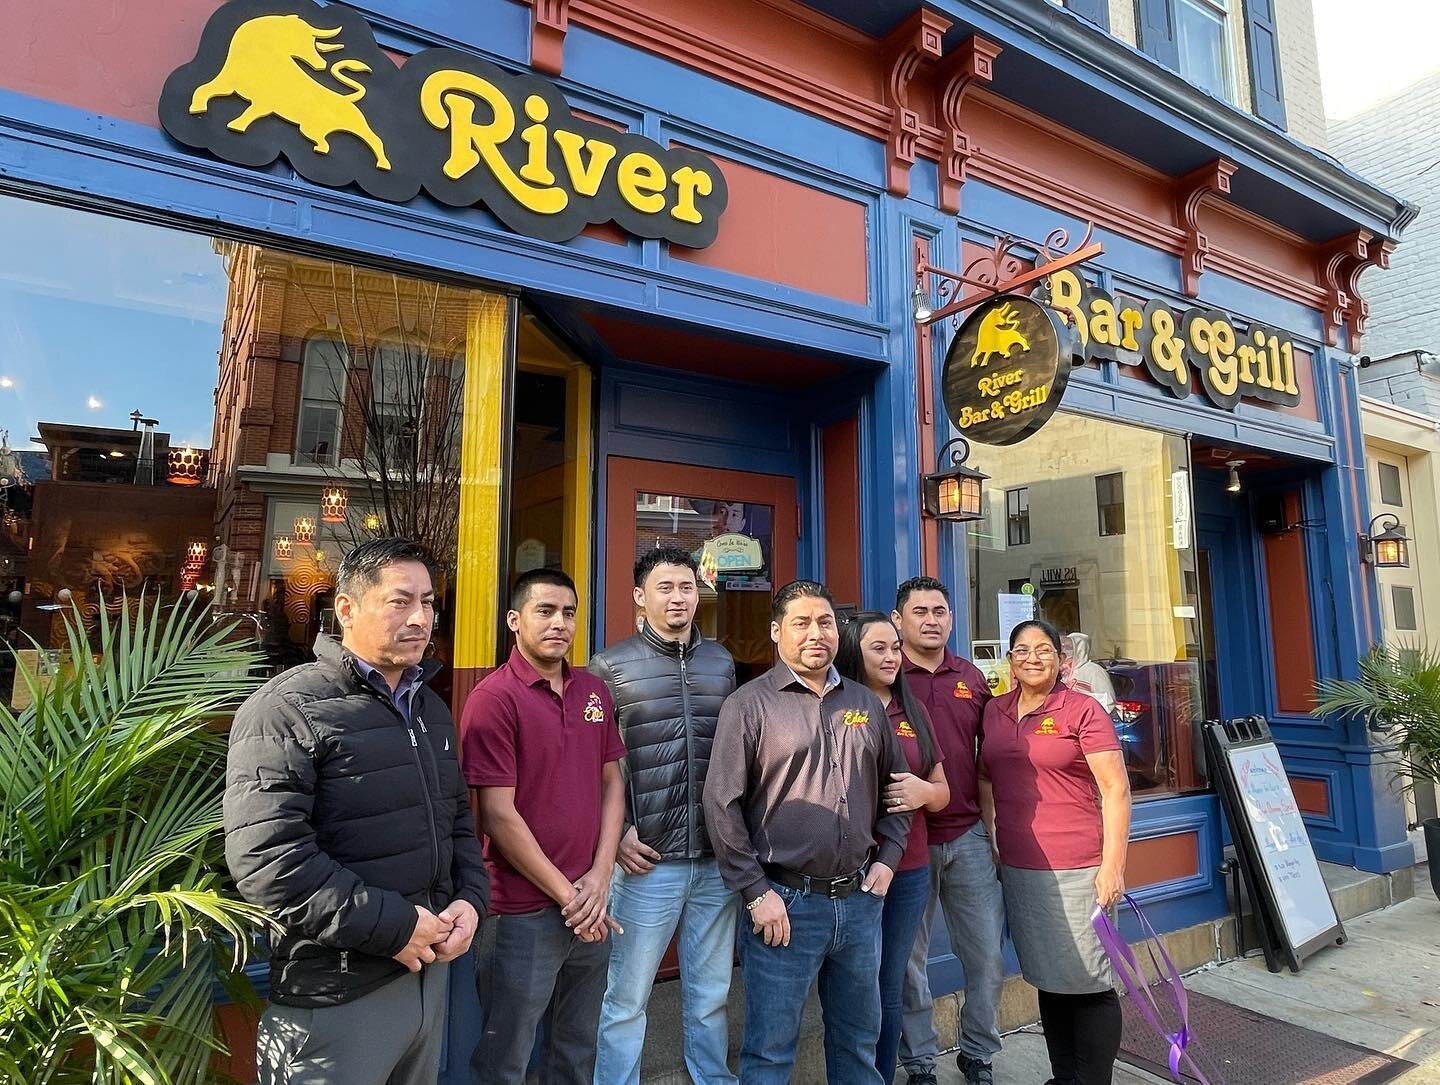 Congratulations &amp; welcome to River Bar &amp; Grill which celebrates its official grand opening today!
River Bar &amp; Grill impressively becomes the third Frederick-based restaurant for the family-team behind the new business &ndash; who also own